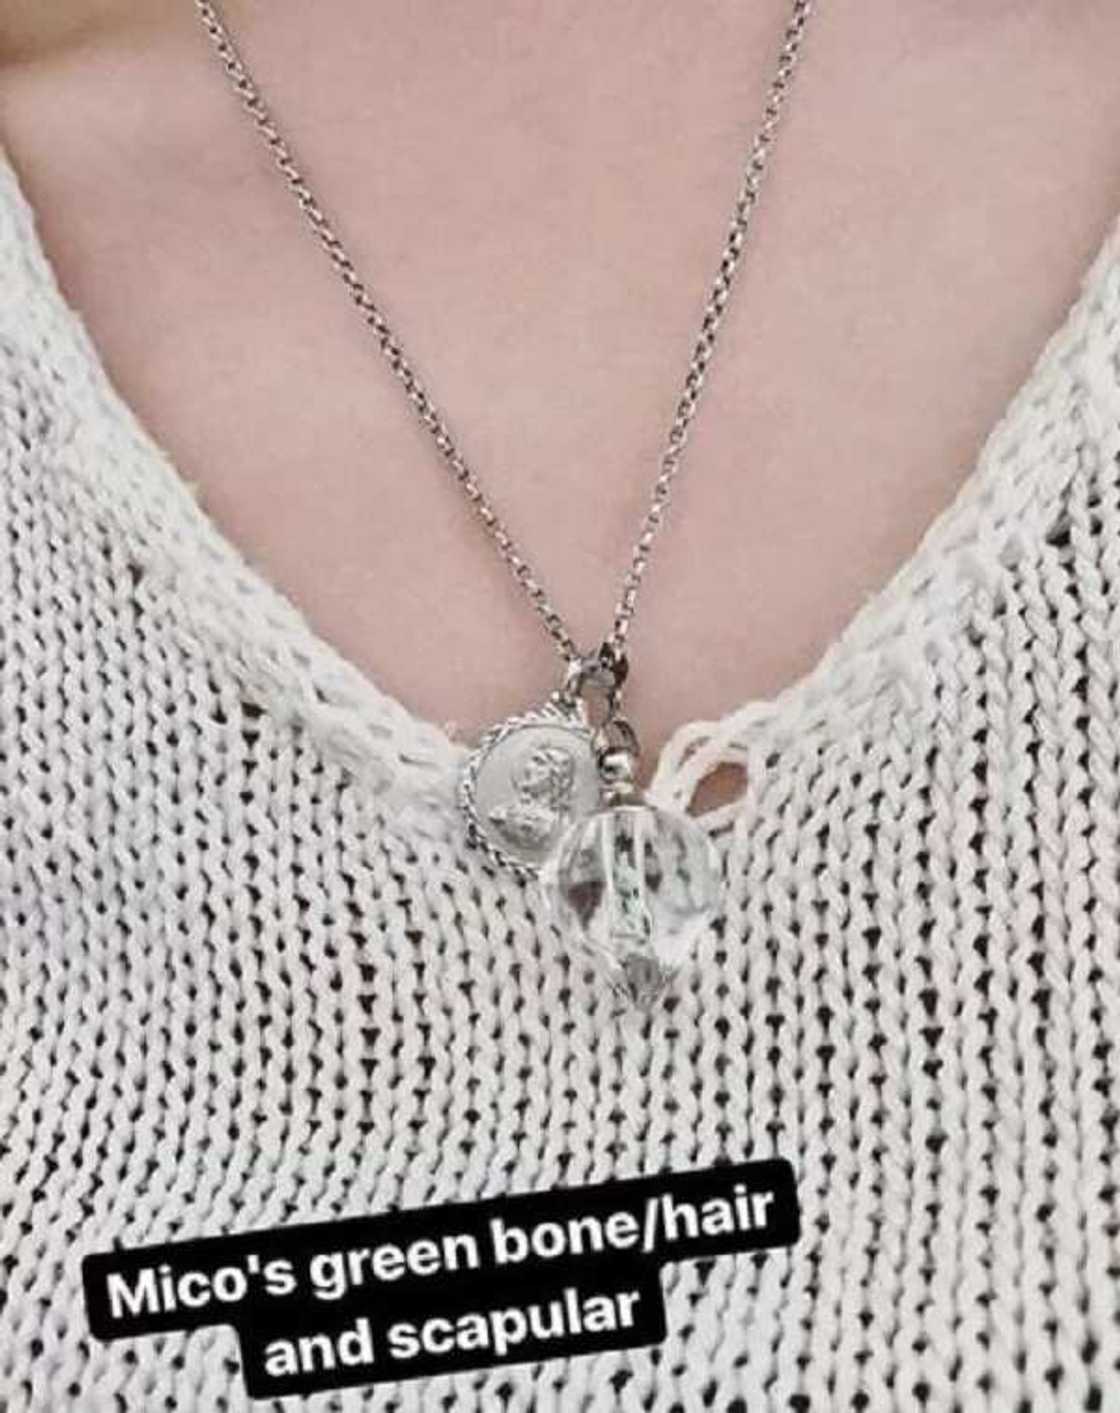 Iba ang pagmamahal! Janica Nam Floresca wears custom necklace with Franco’s bone fragments and hair